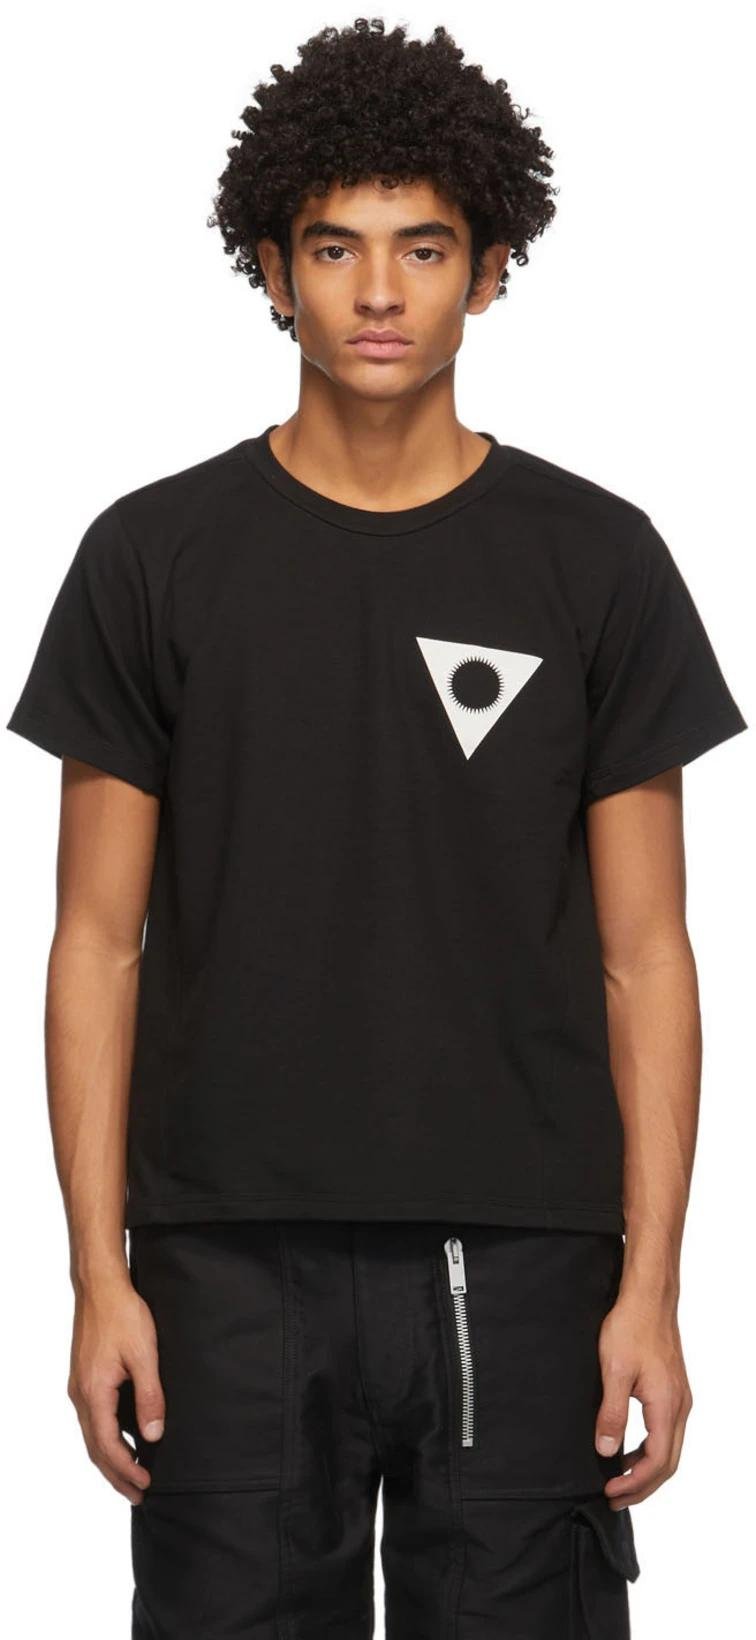 SSENSE Exclusive Black French Terry Korps T-Shirt by ADYAR